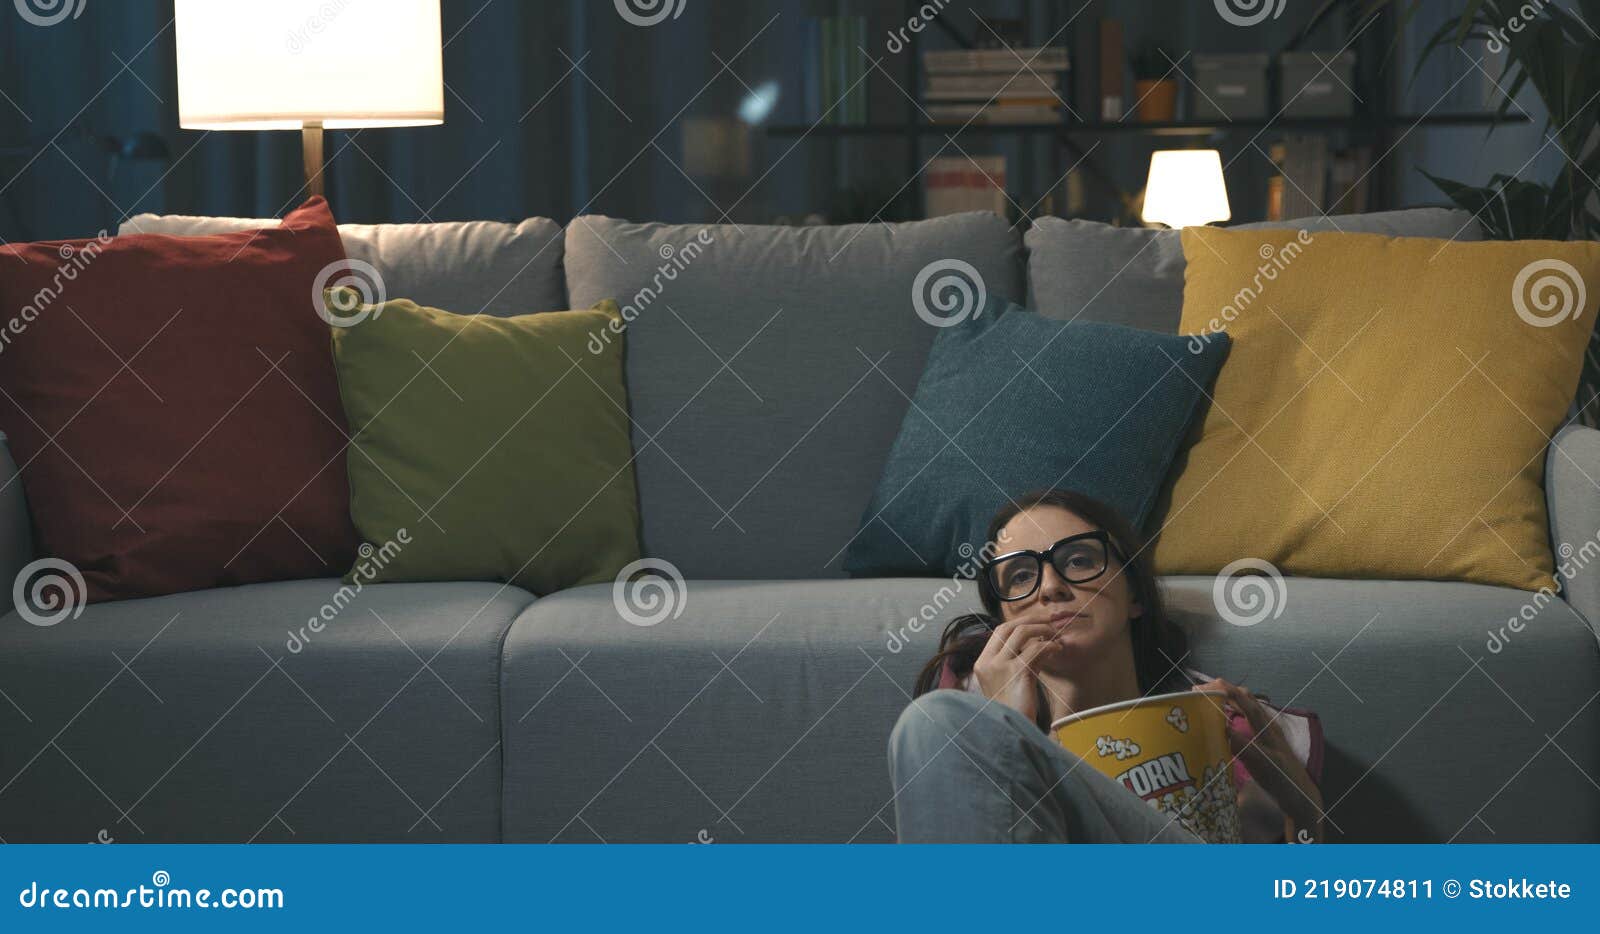 woman sitting on the floor and watching tv